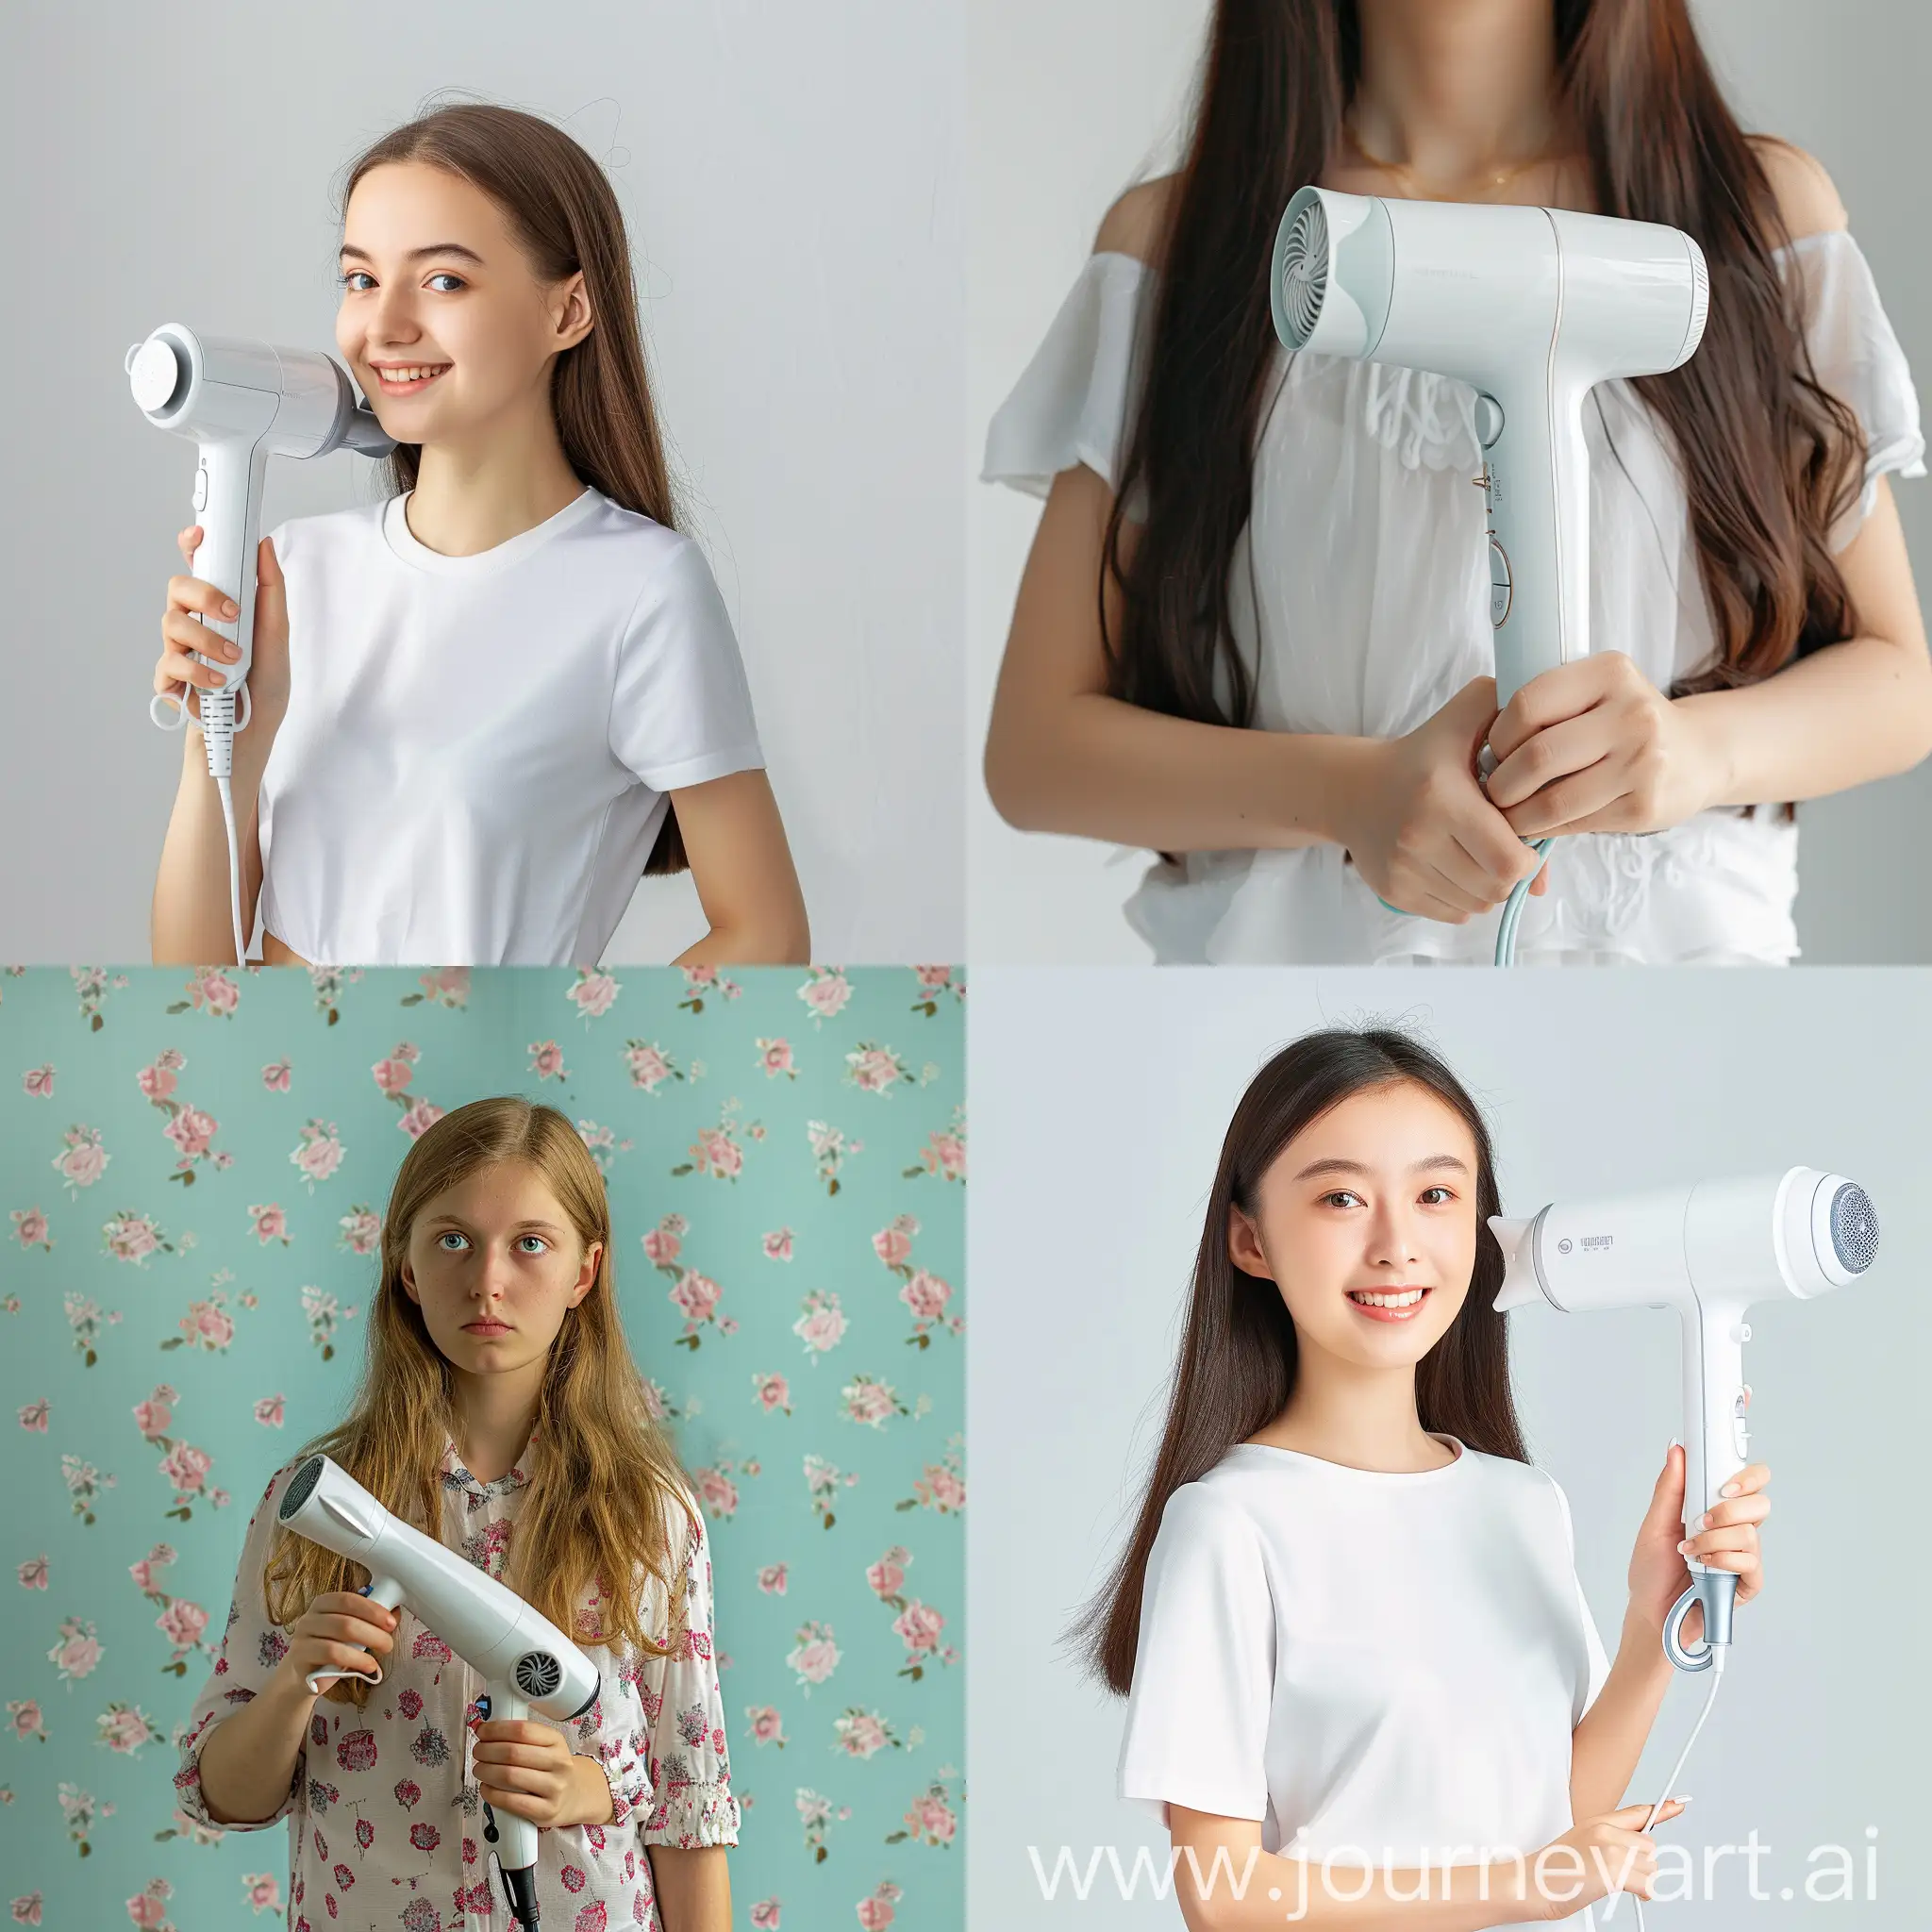 Young-Girl-Holding-Hairdryer-in-Square-Frame